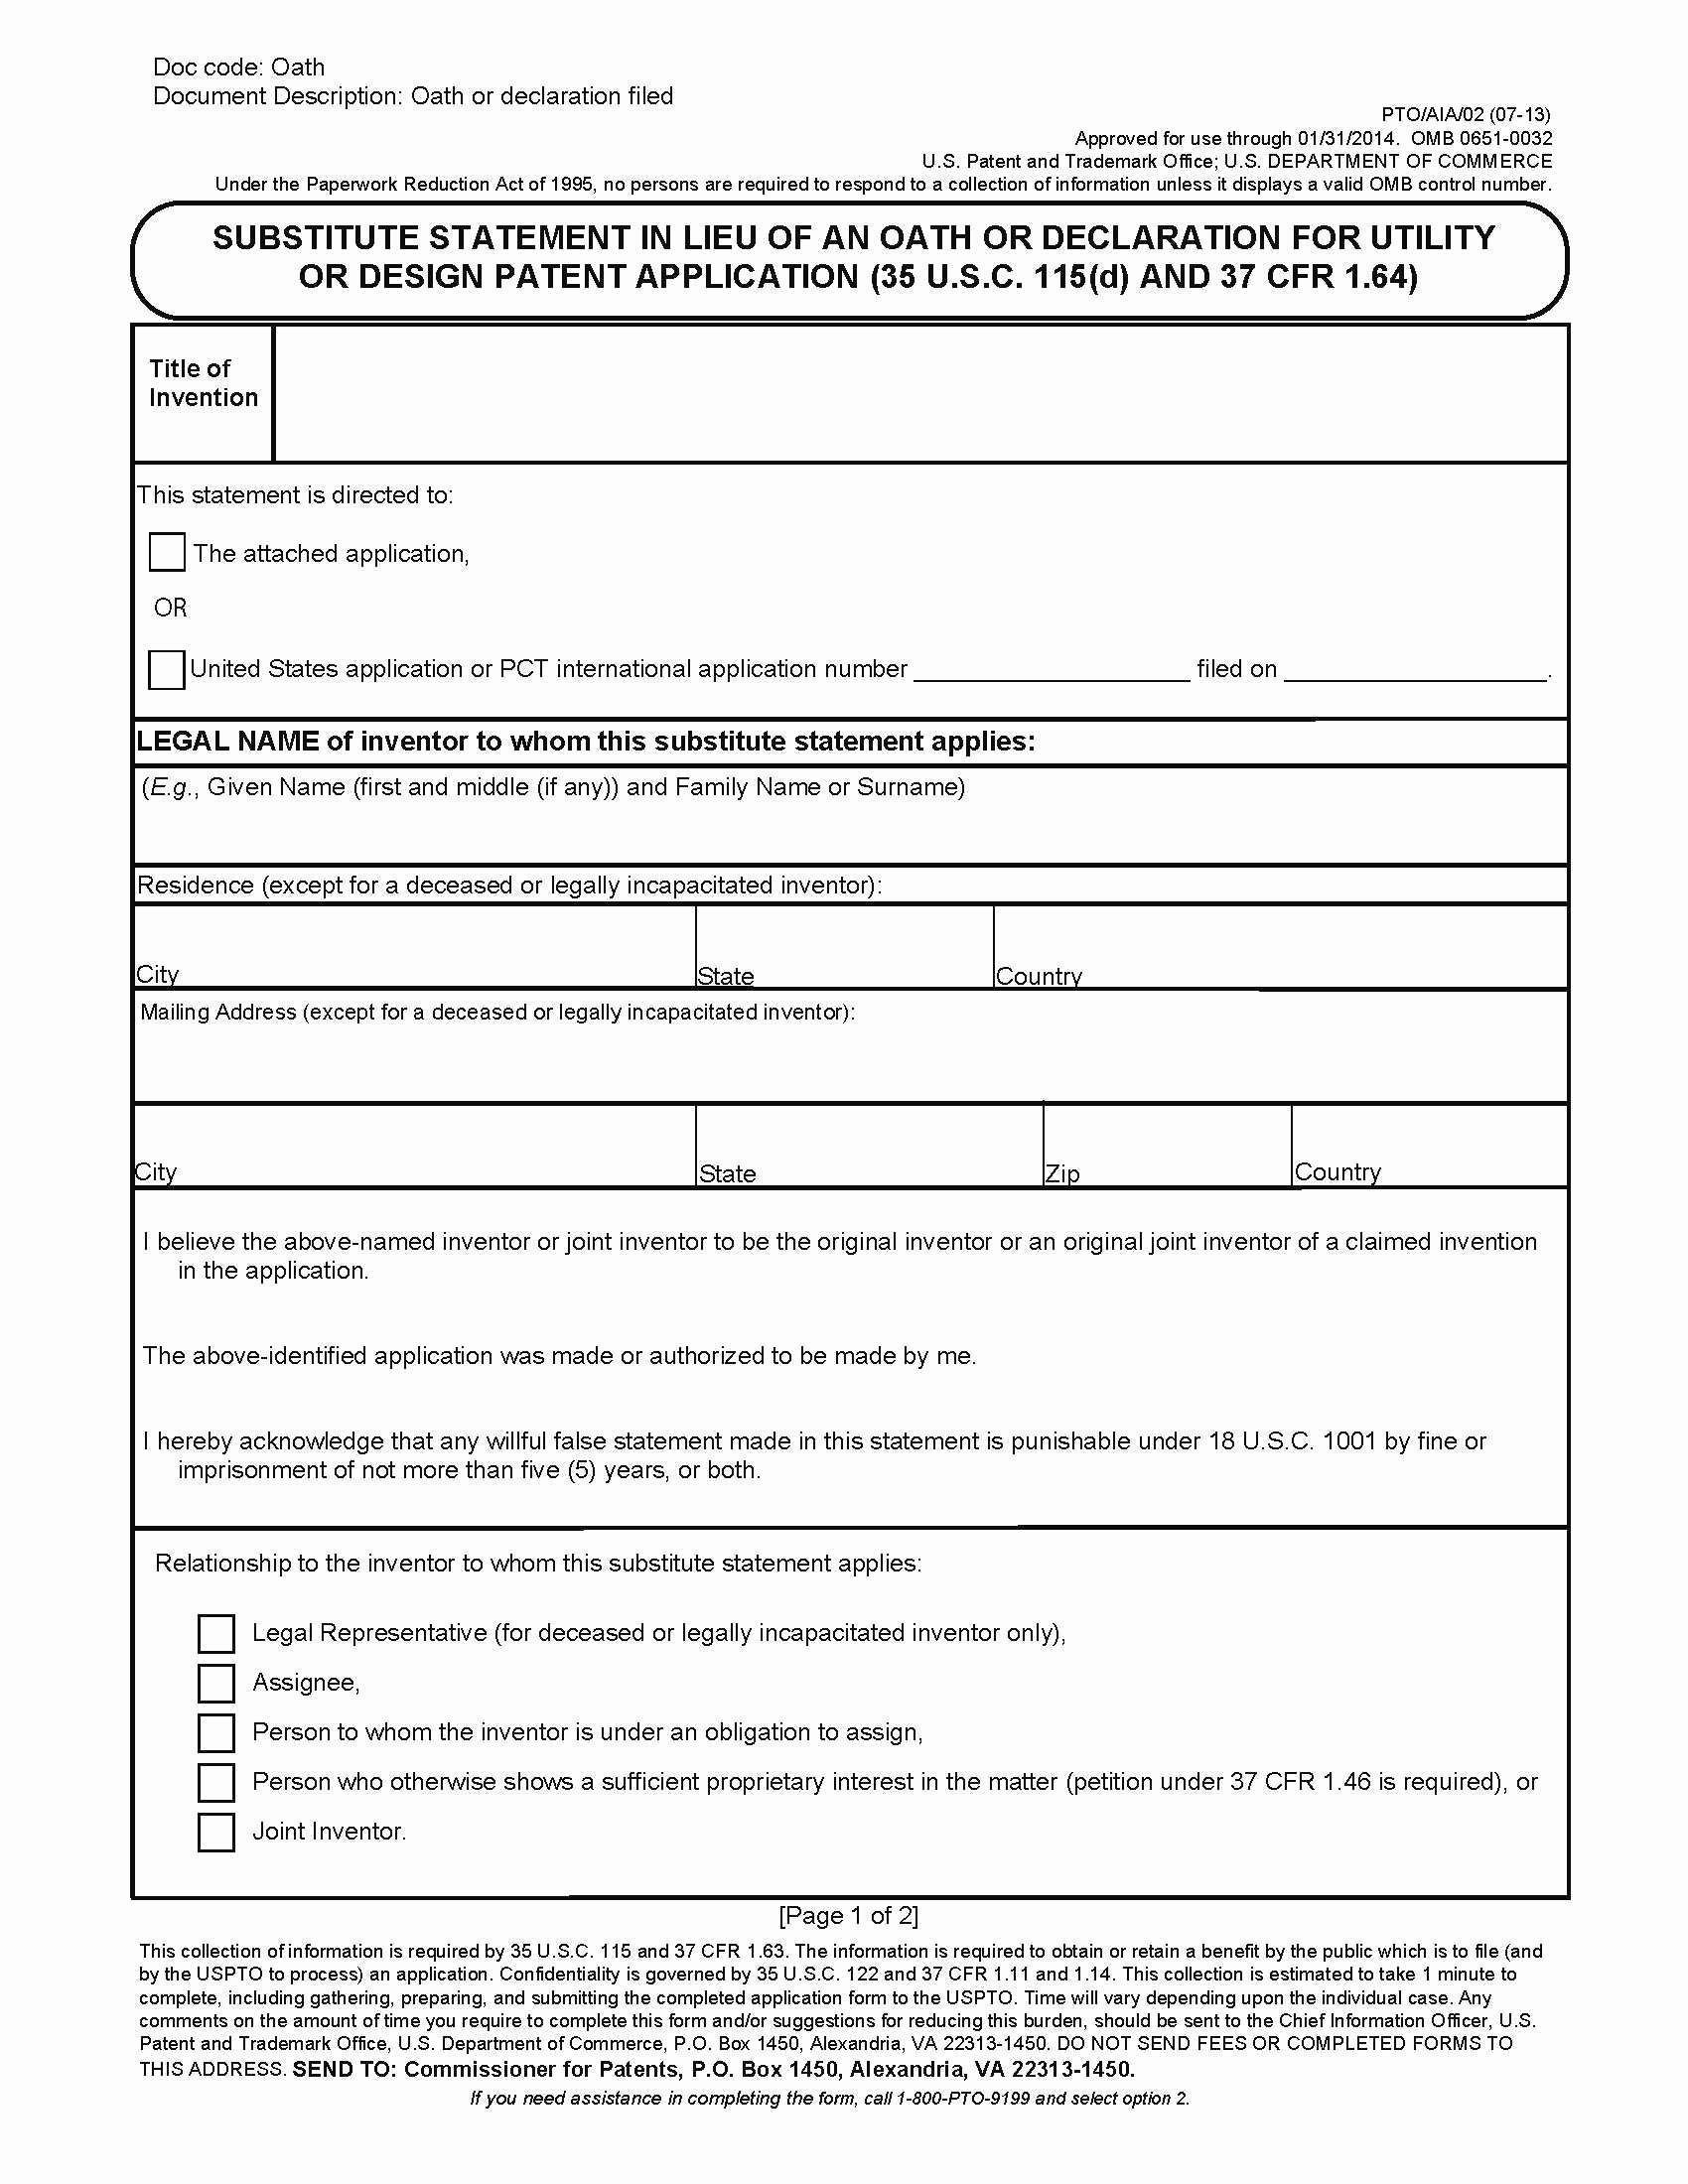 Lovely Non Provisional Utility Patent Application Template